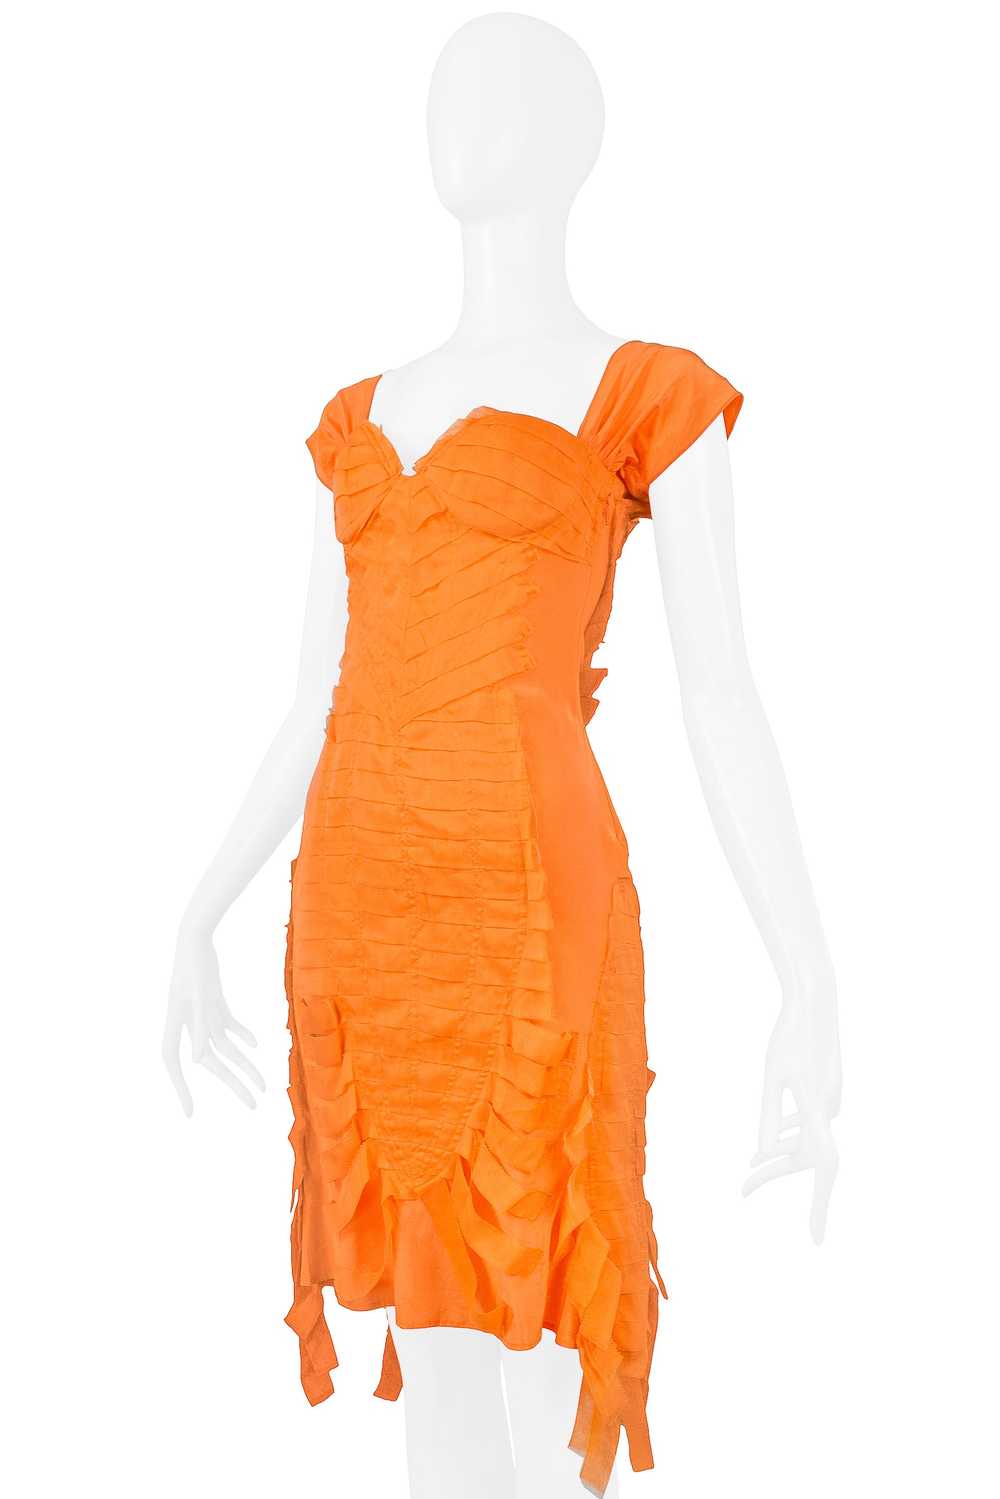 GUCCI BY TOM FORD ORANGE SILK COCKTAIL DRESS 2004 - image 5